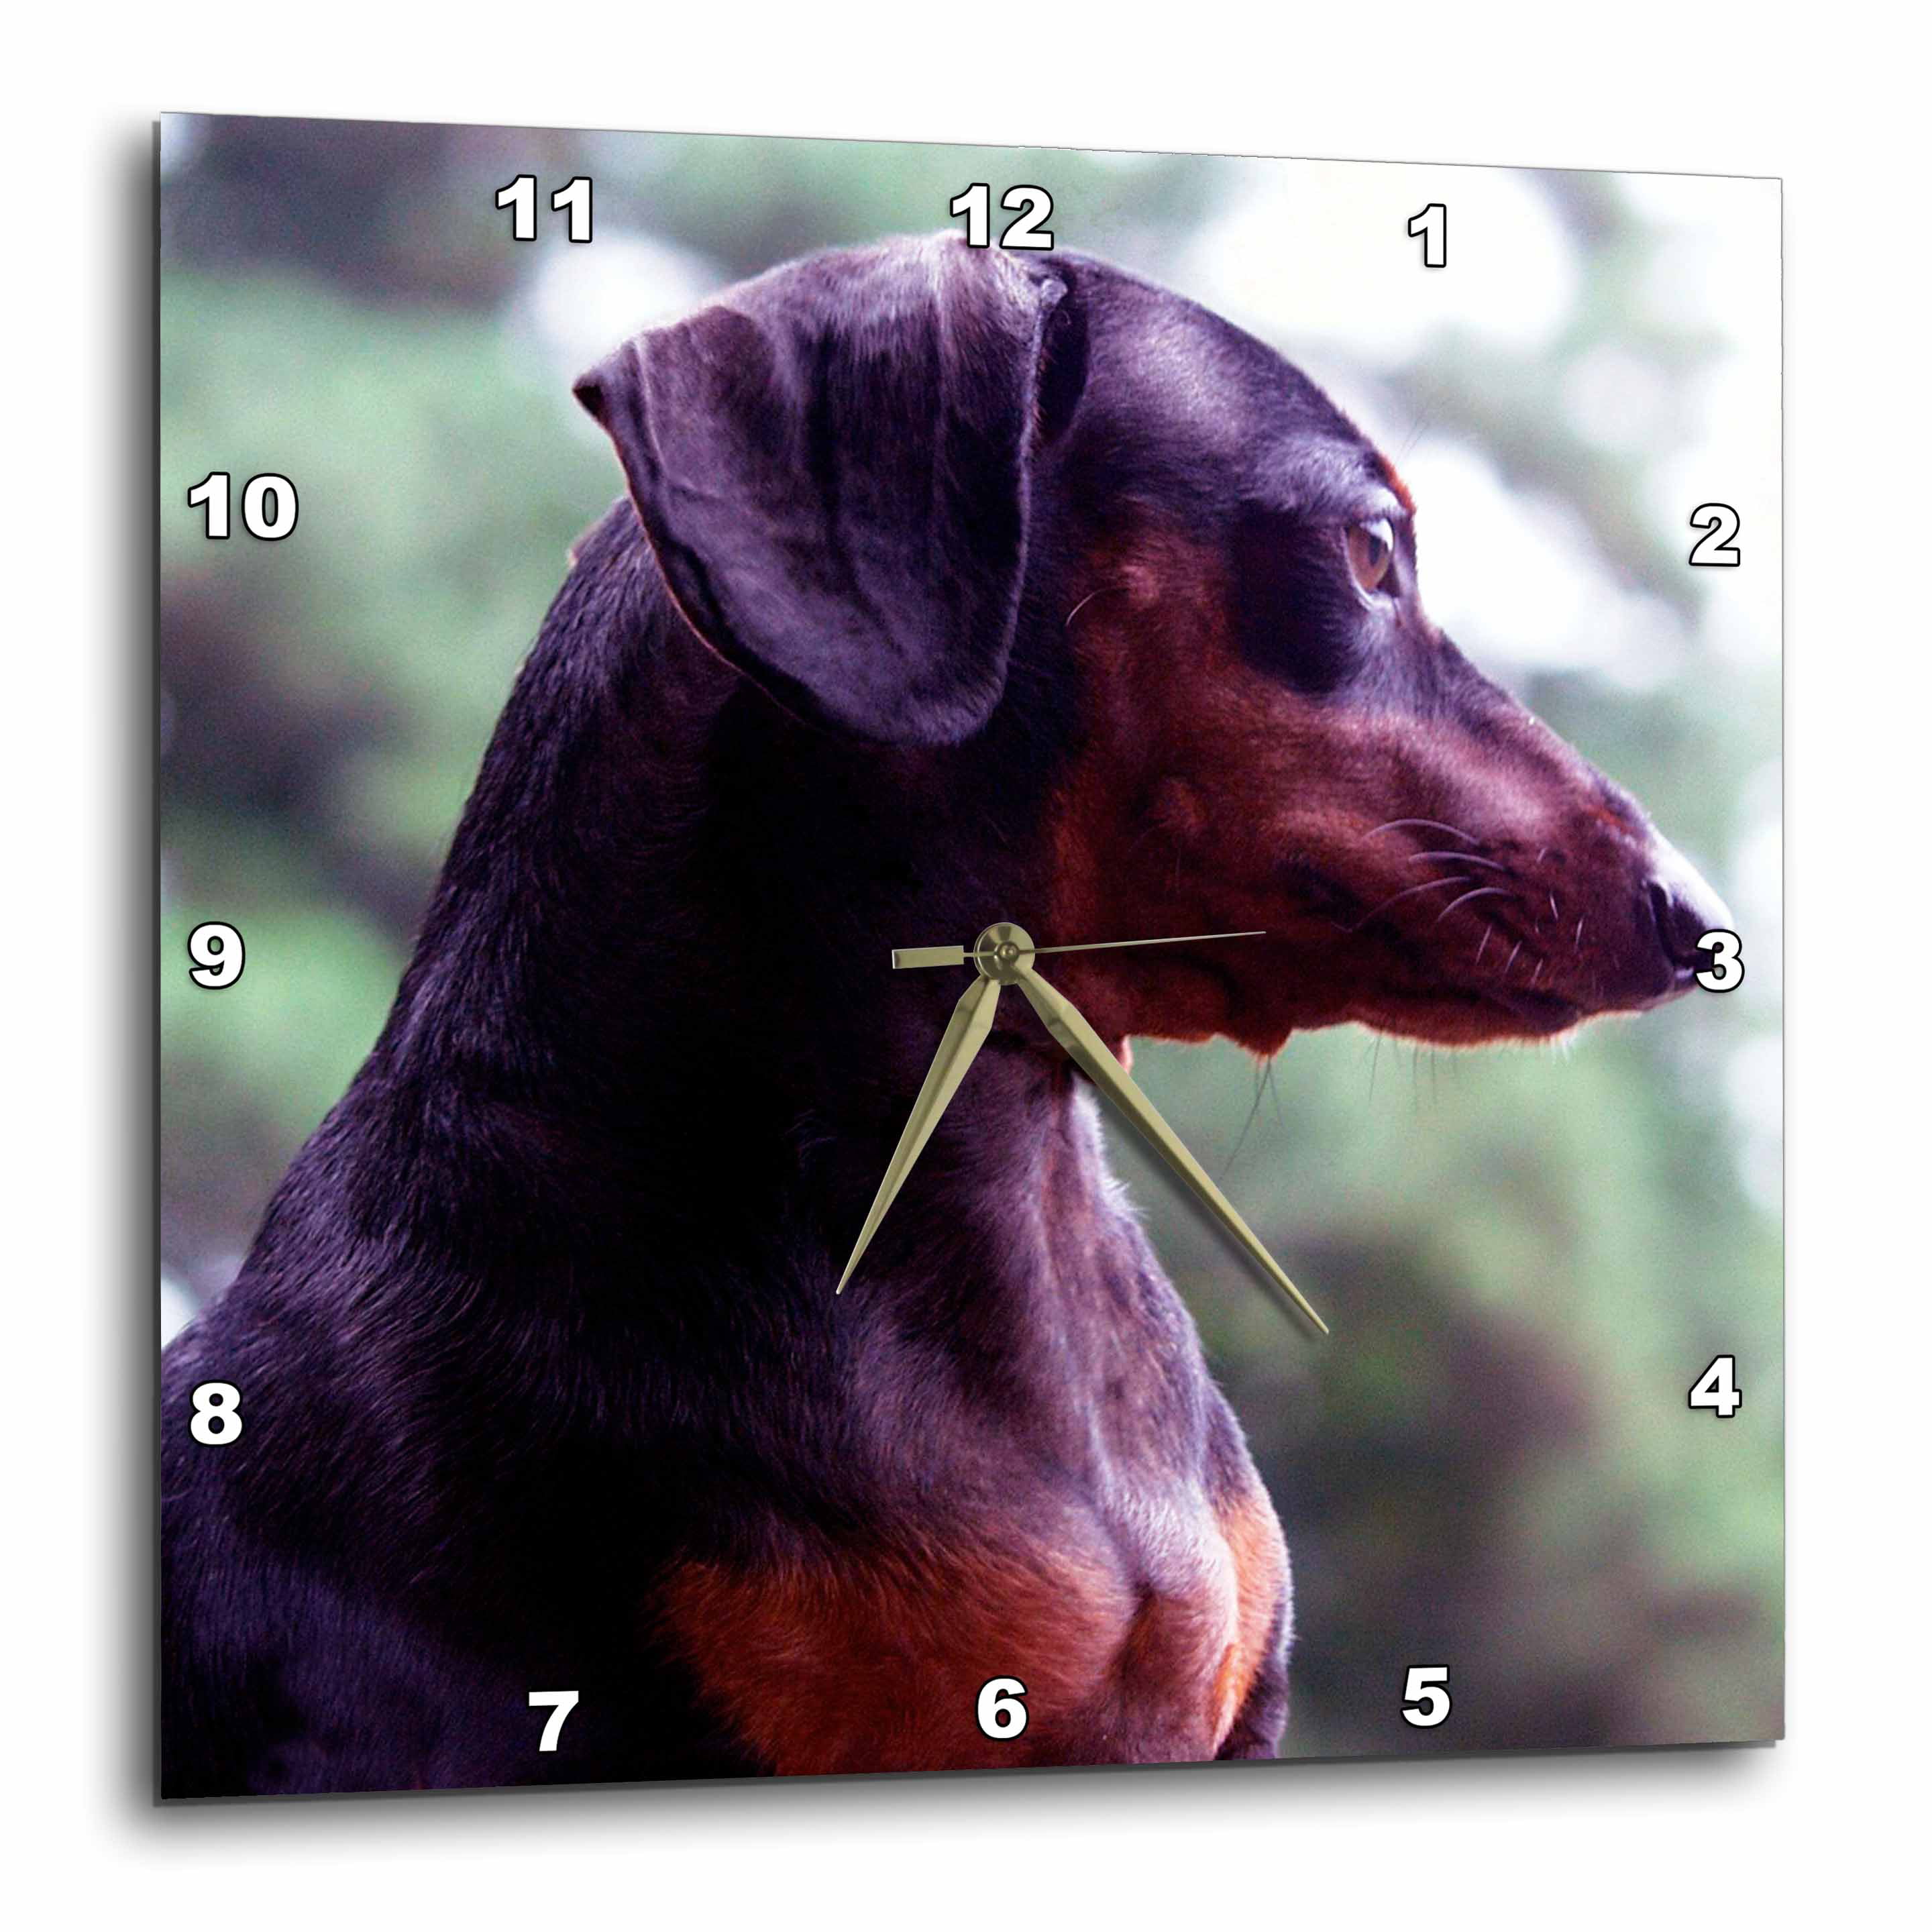 3dRose Weiner Dog with a Sharks Fin-Desk Clock dc_164020_1 6 x 6 6 by 6-inch